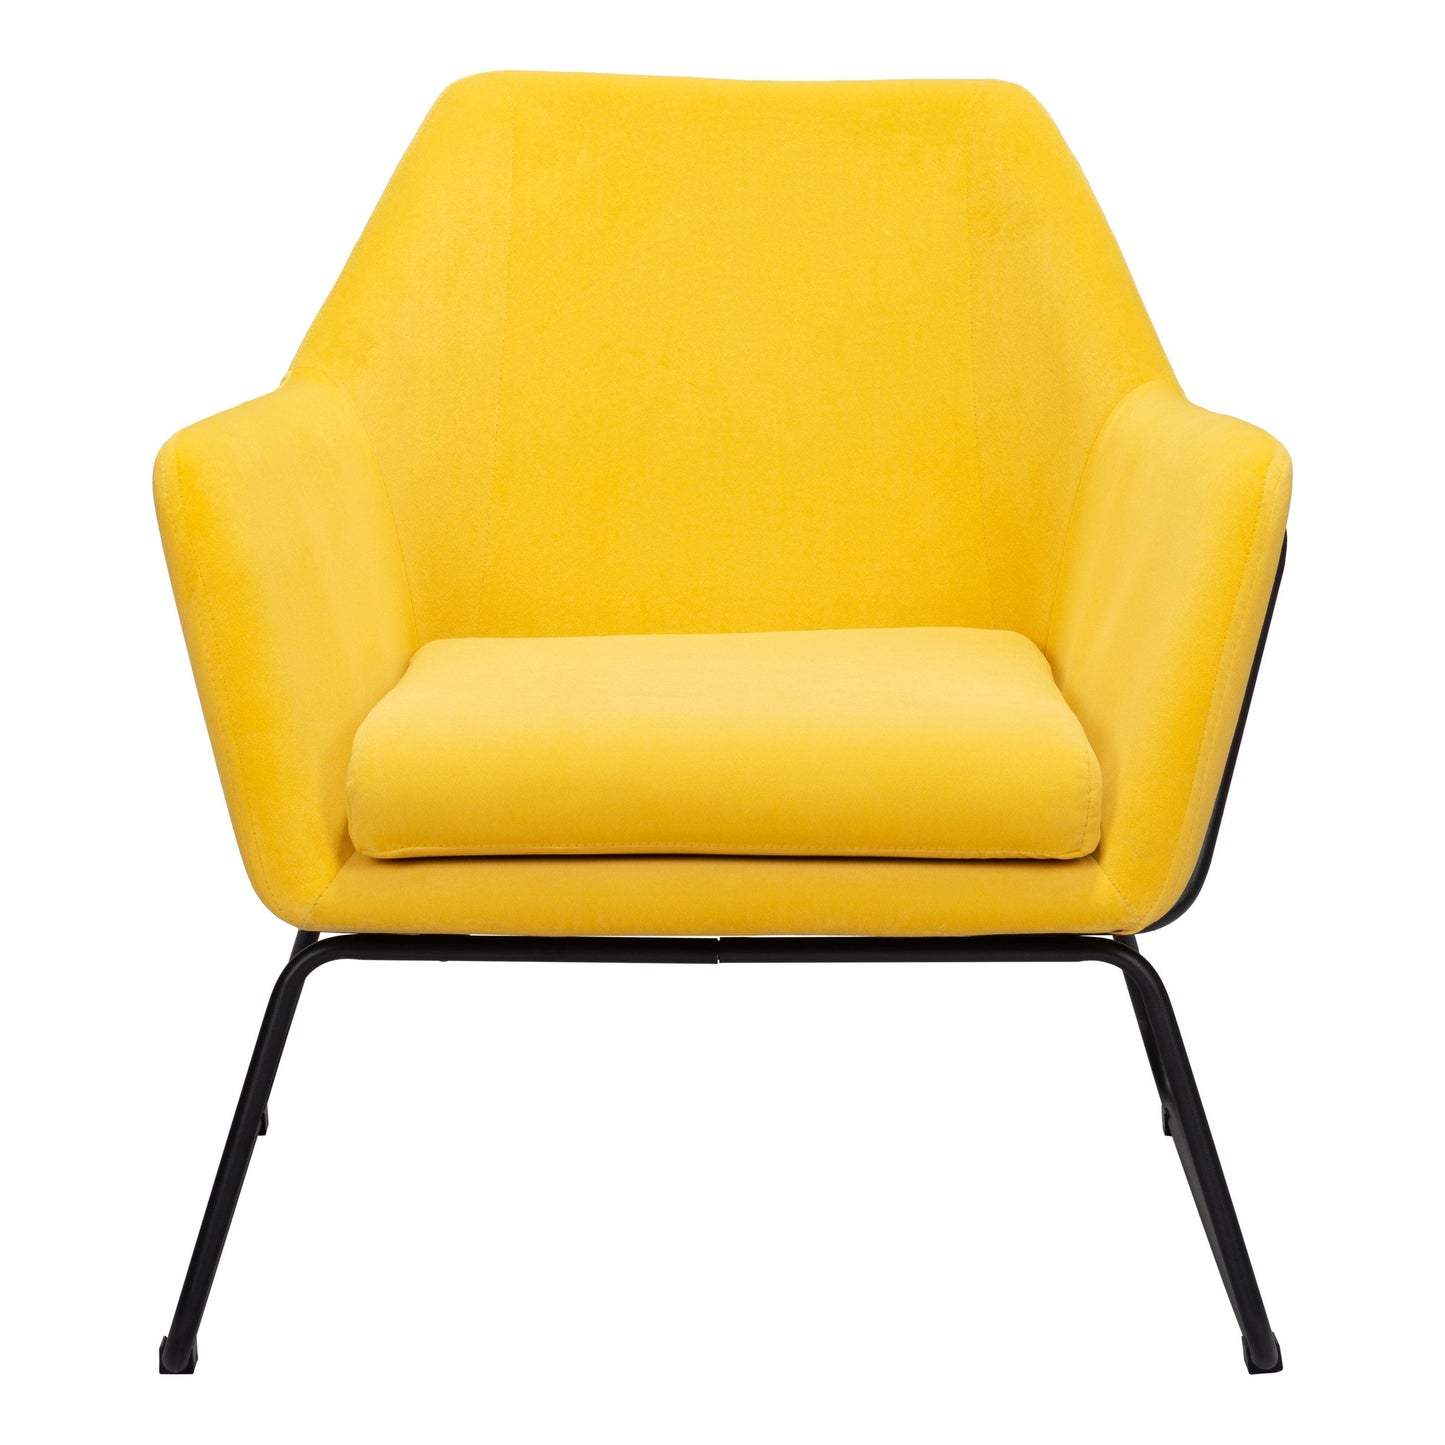 Jose Accent Chair Yellow - Sideboards and Things Brand_Zuo Modern, Color_Black, Color_Yellow, Features_Removable Cushions, Finish_Powder Coated, Materials_Metal, Materials_Wood, Metal Type_Steel, Product Type_Occasional Chair, Upholstery Type_Fabric Blend, Upholstery Type_Polyester, Wood Species_Plywood